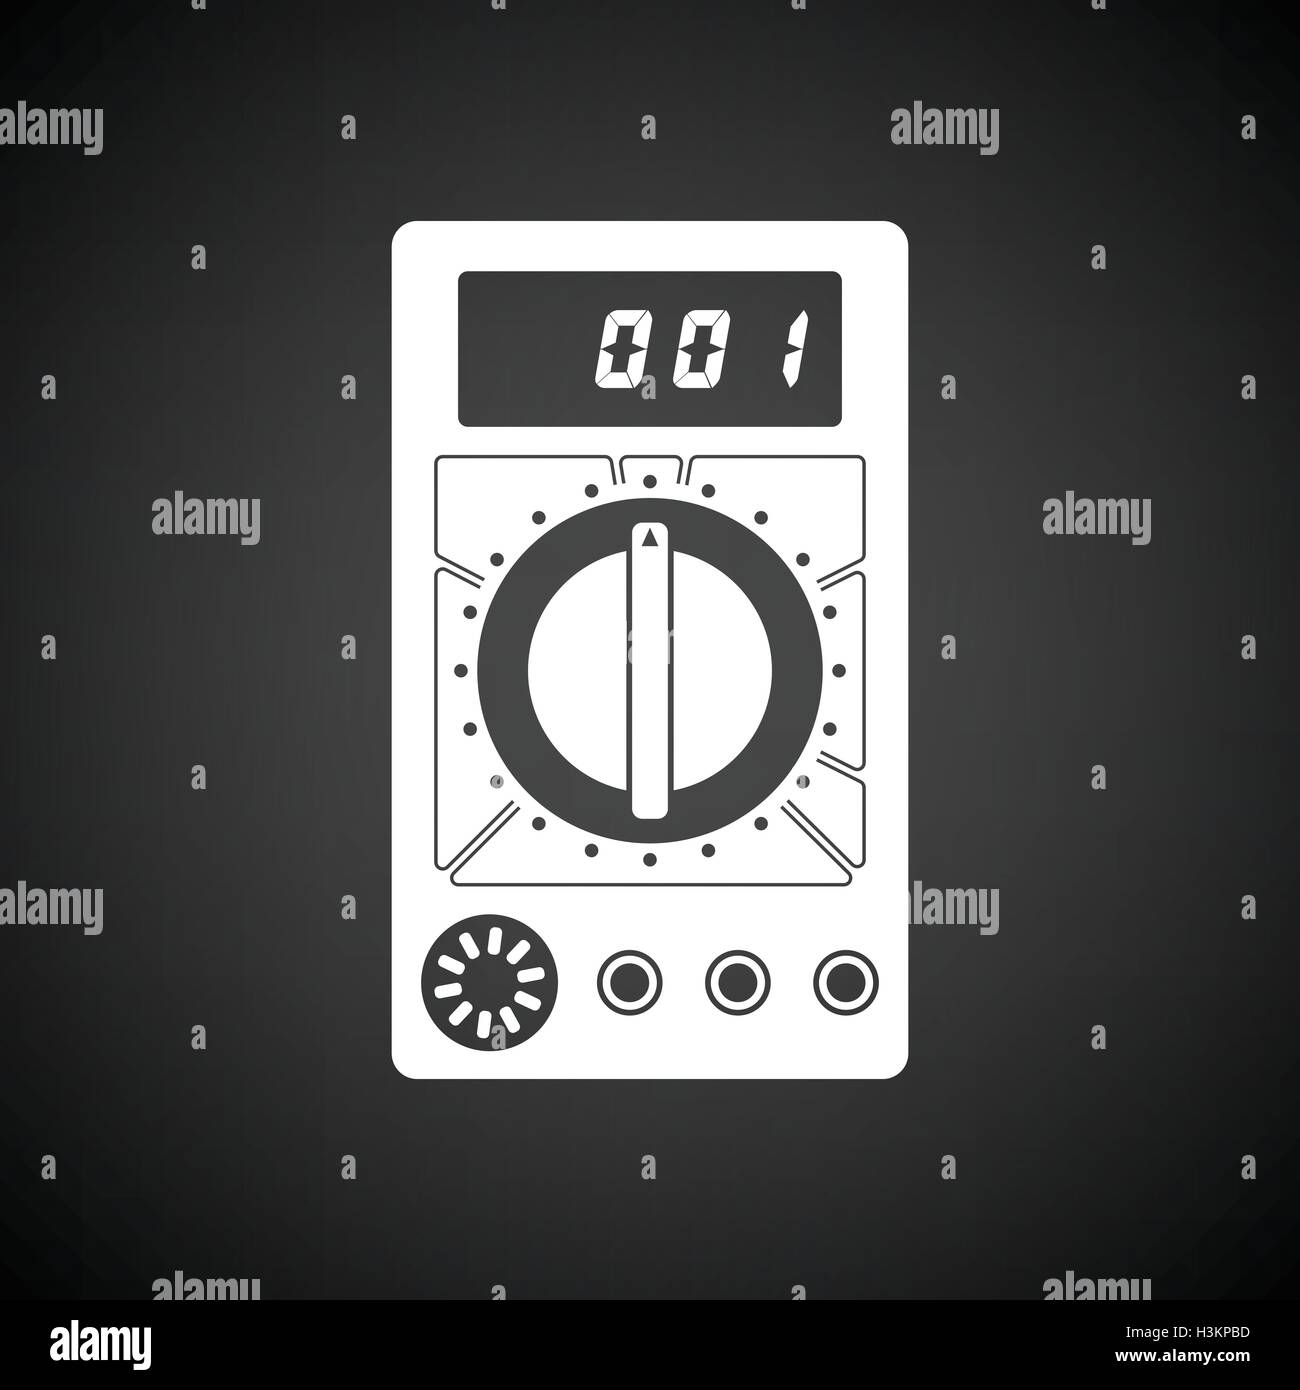 Multimeter icon. Black background with white. Vector illustration. Stock Vector